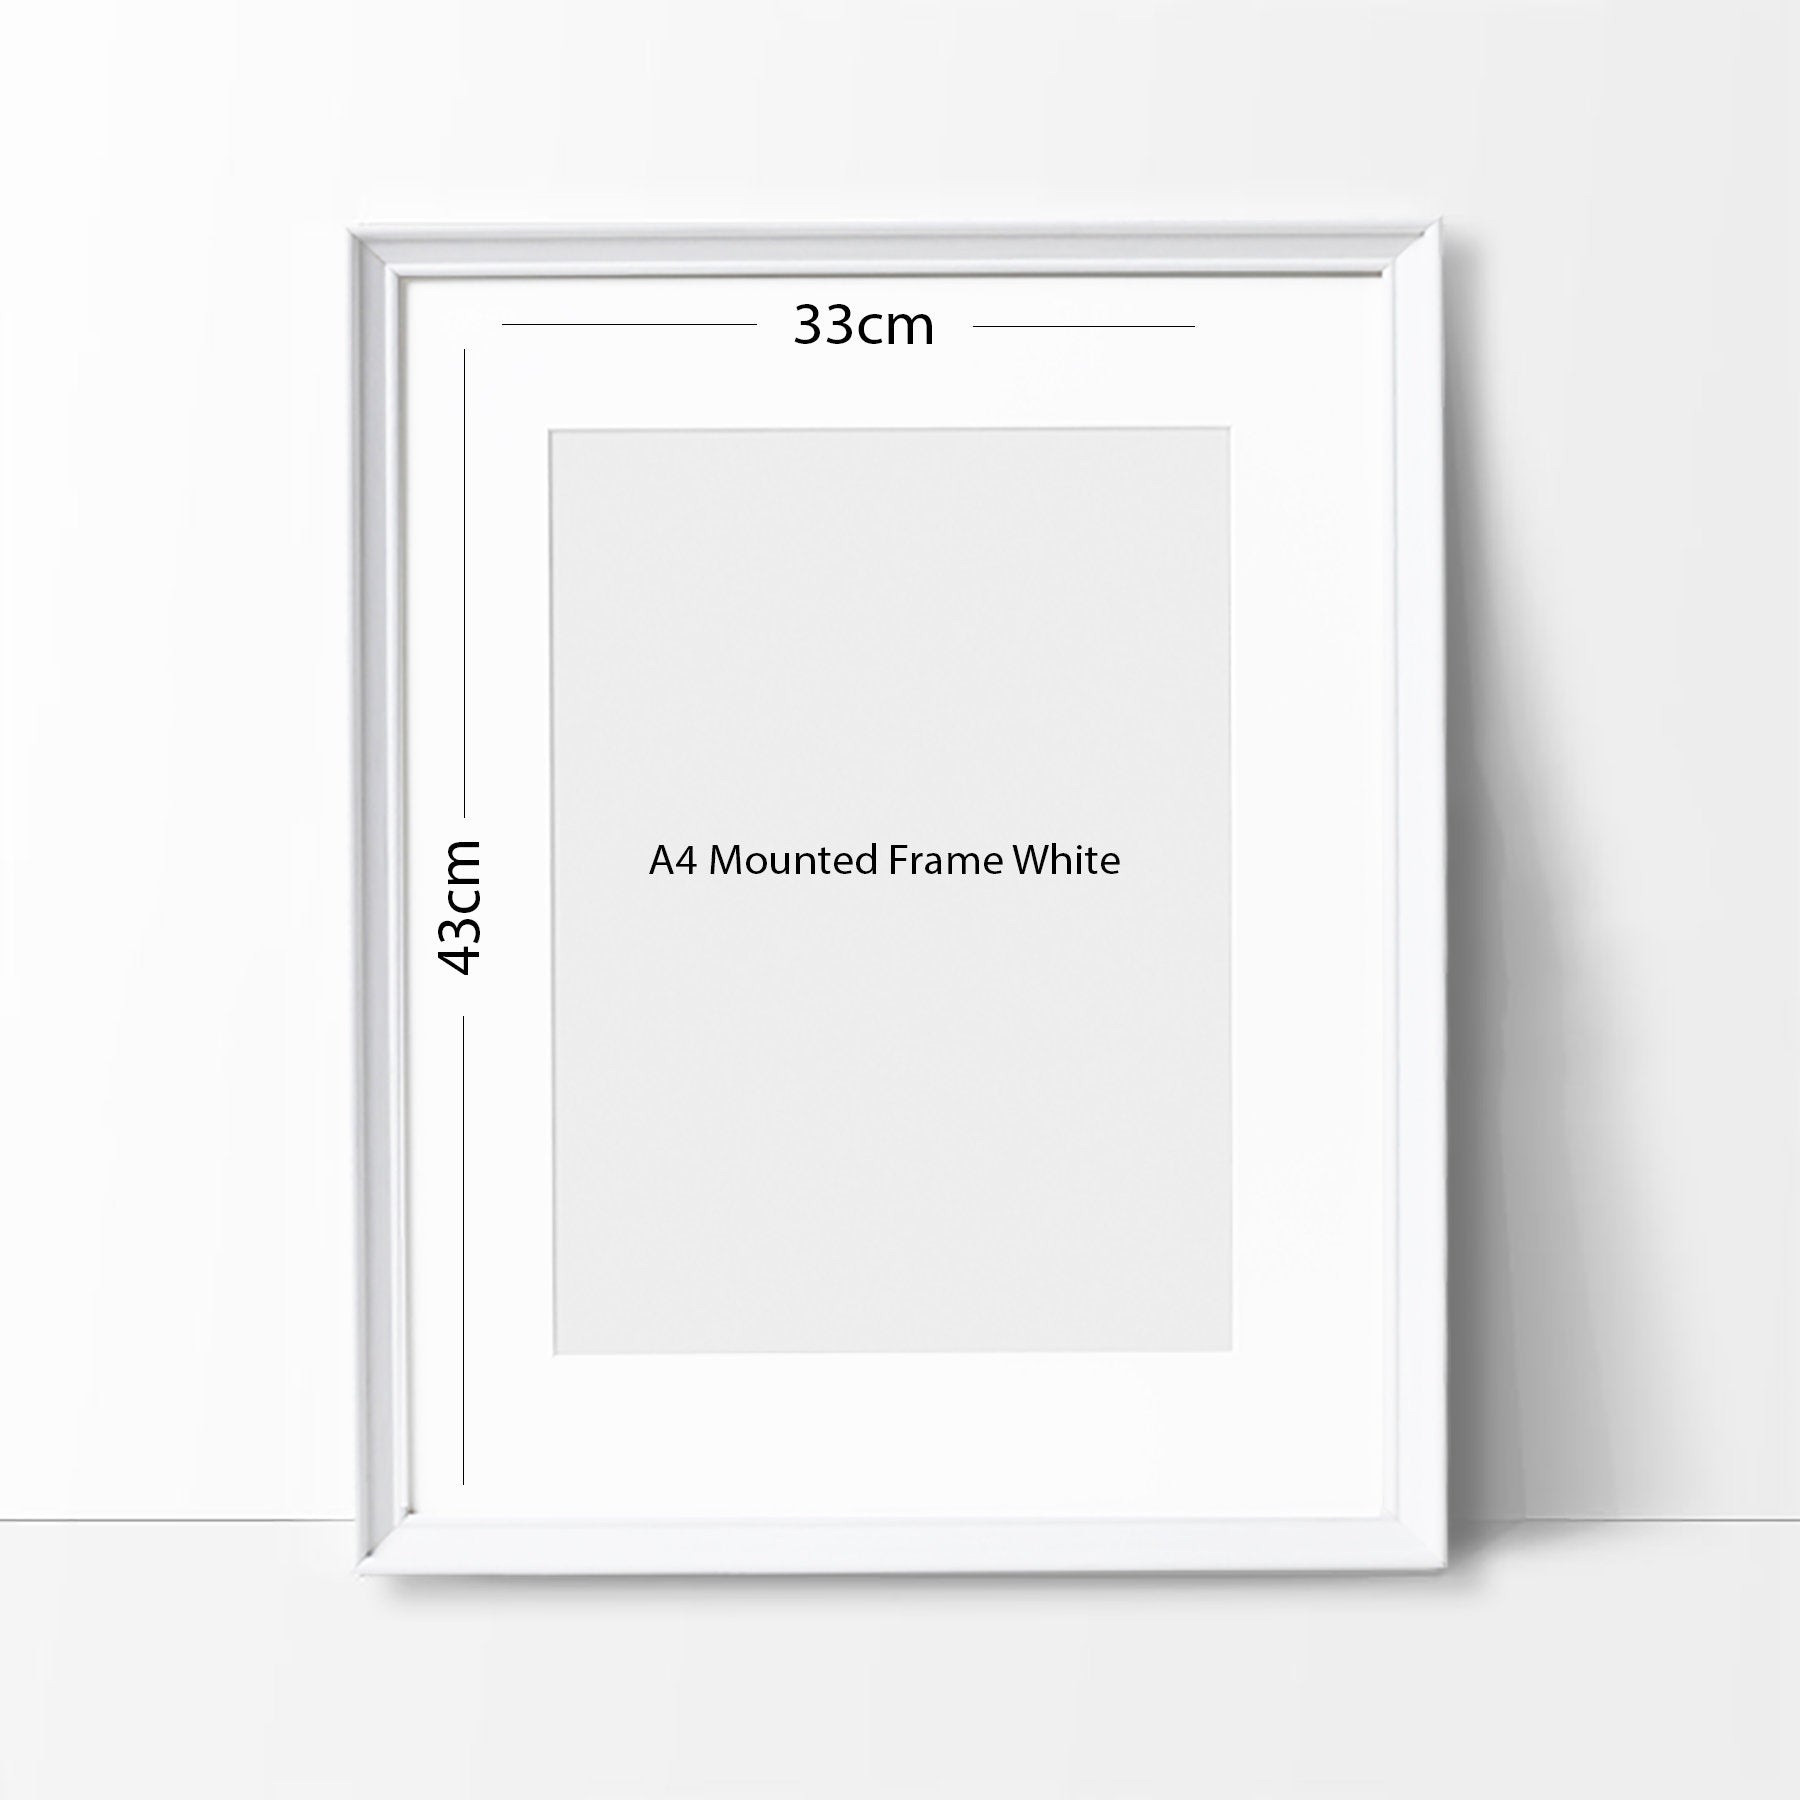 Fawlty Hotel Family Minimalist Art | Watercolor Art Print Poster Gift Idea For Him Or Her | British Tv Comedy